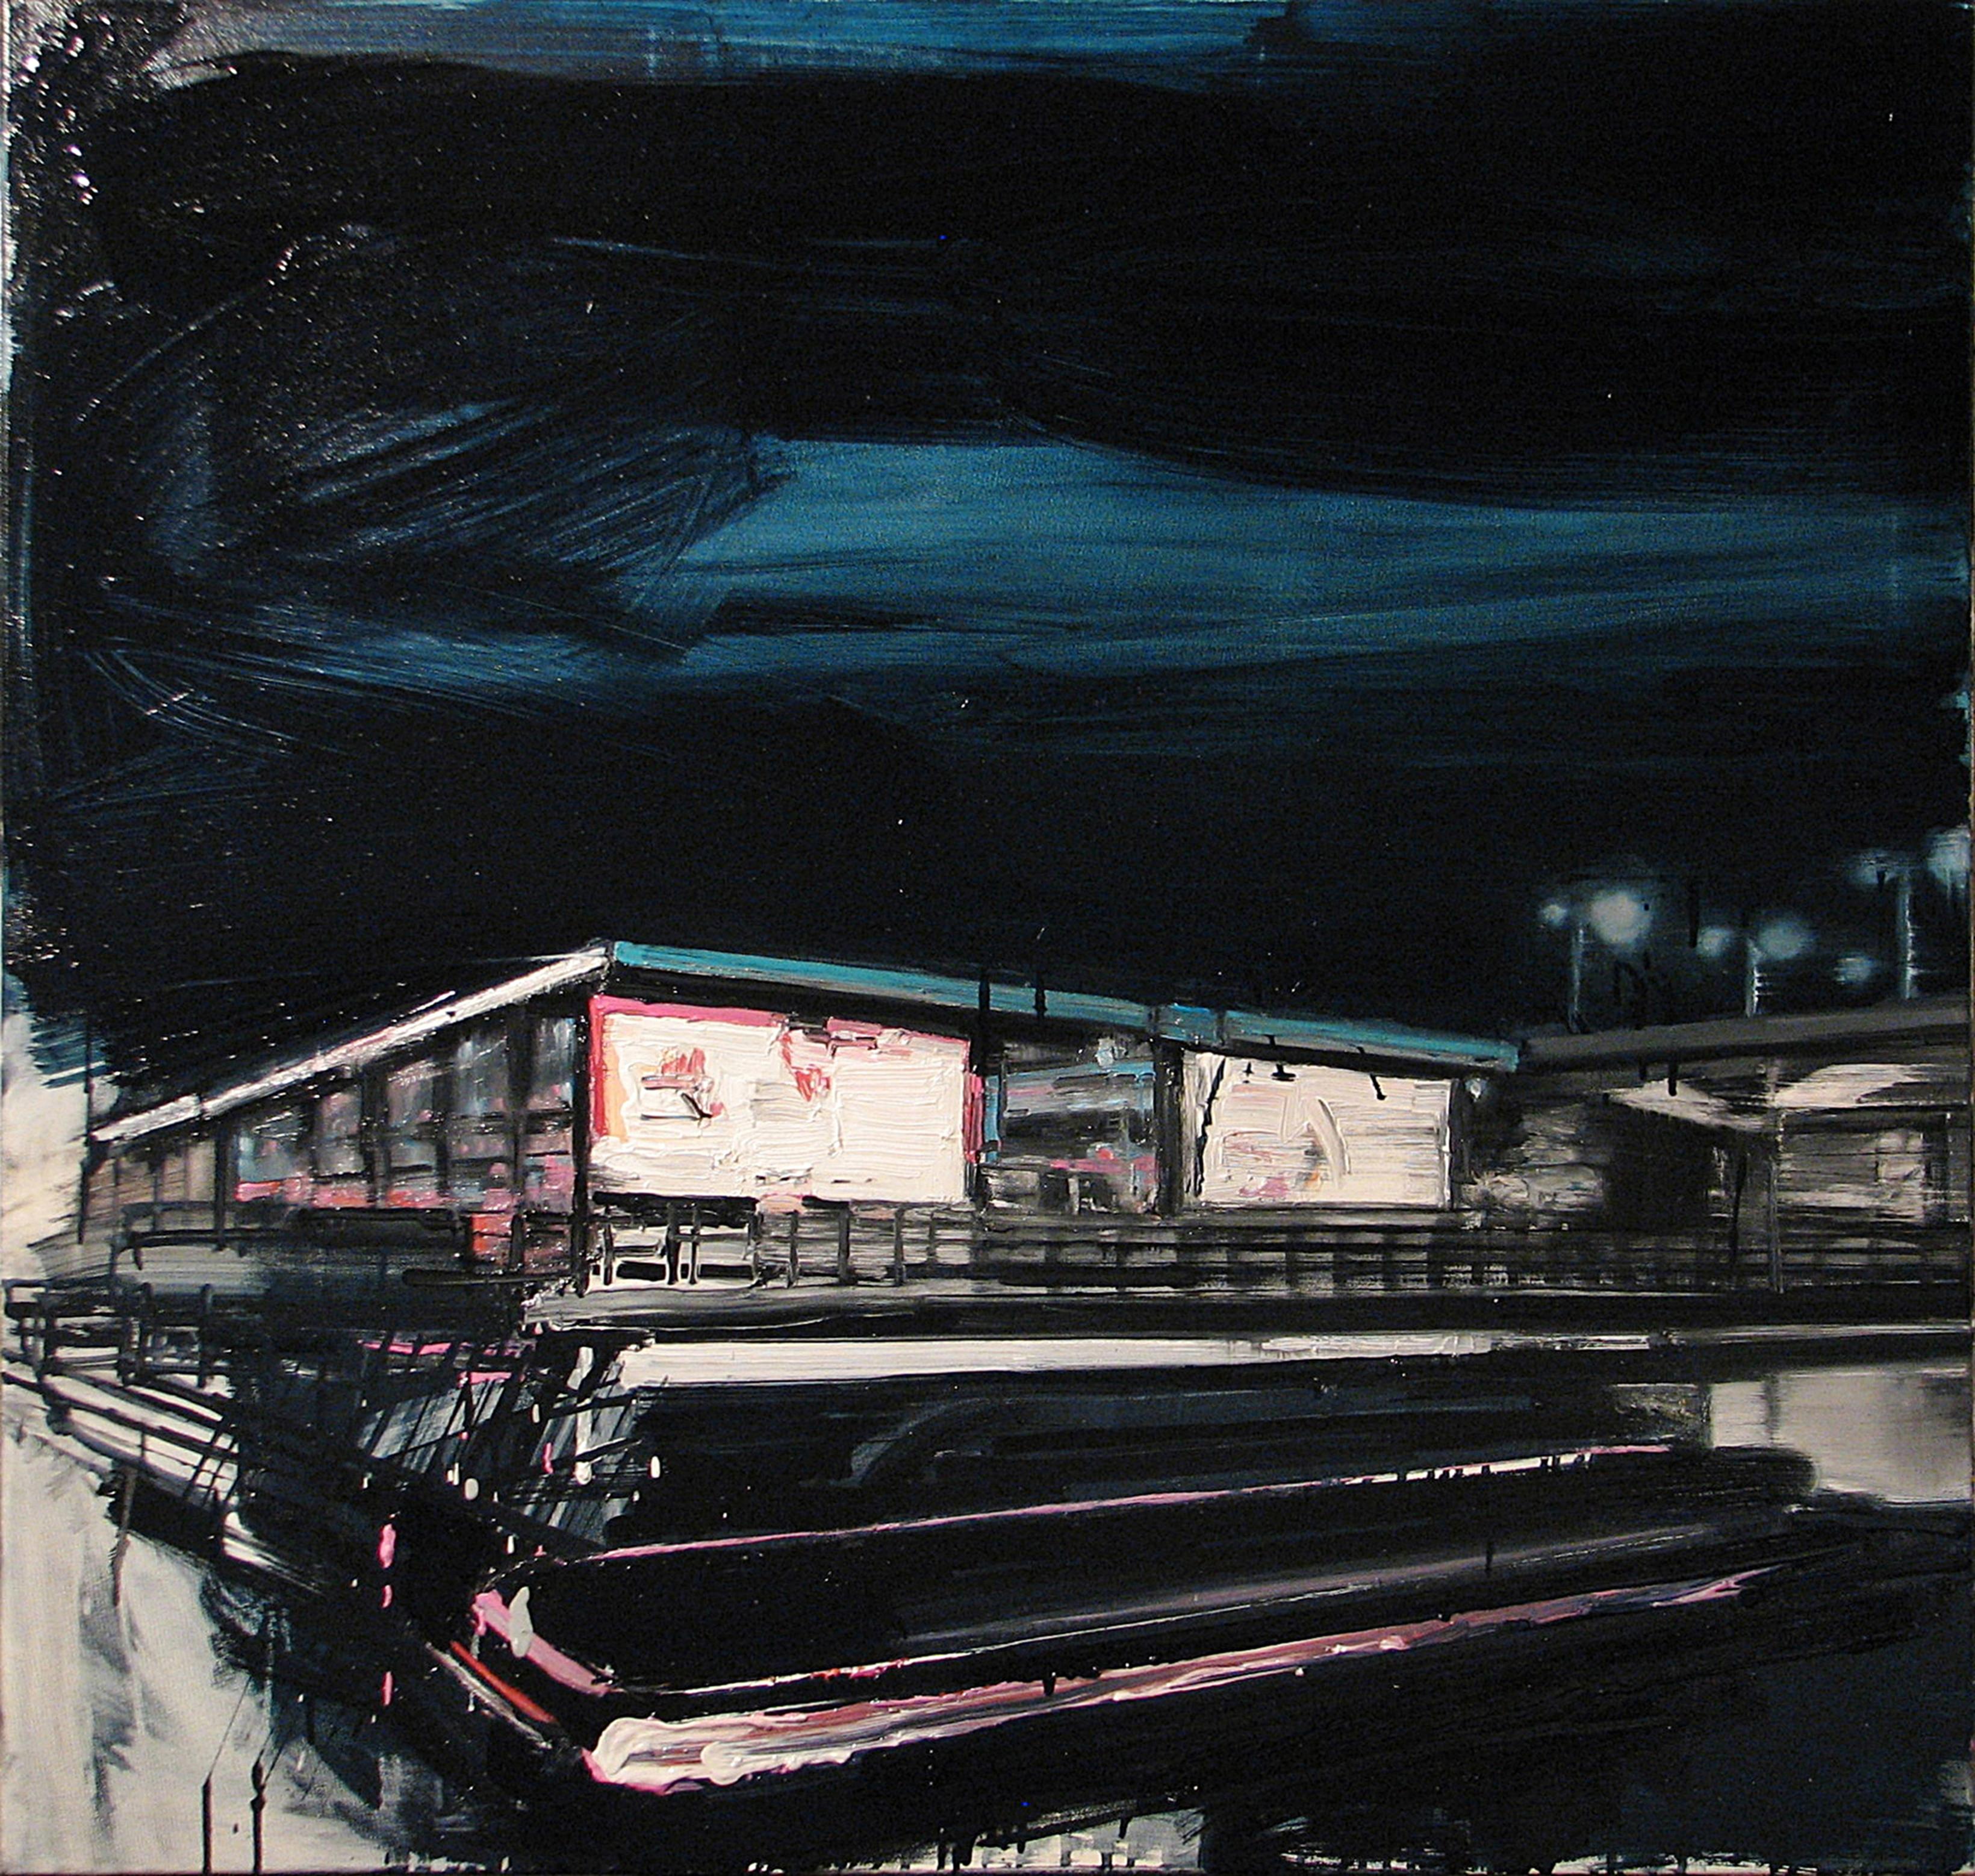 Robert Bubel Landscape Painting - Mooring Light Lines On Railway Stations - Expressive Contemporary Oil Painting